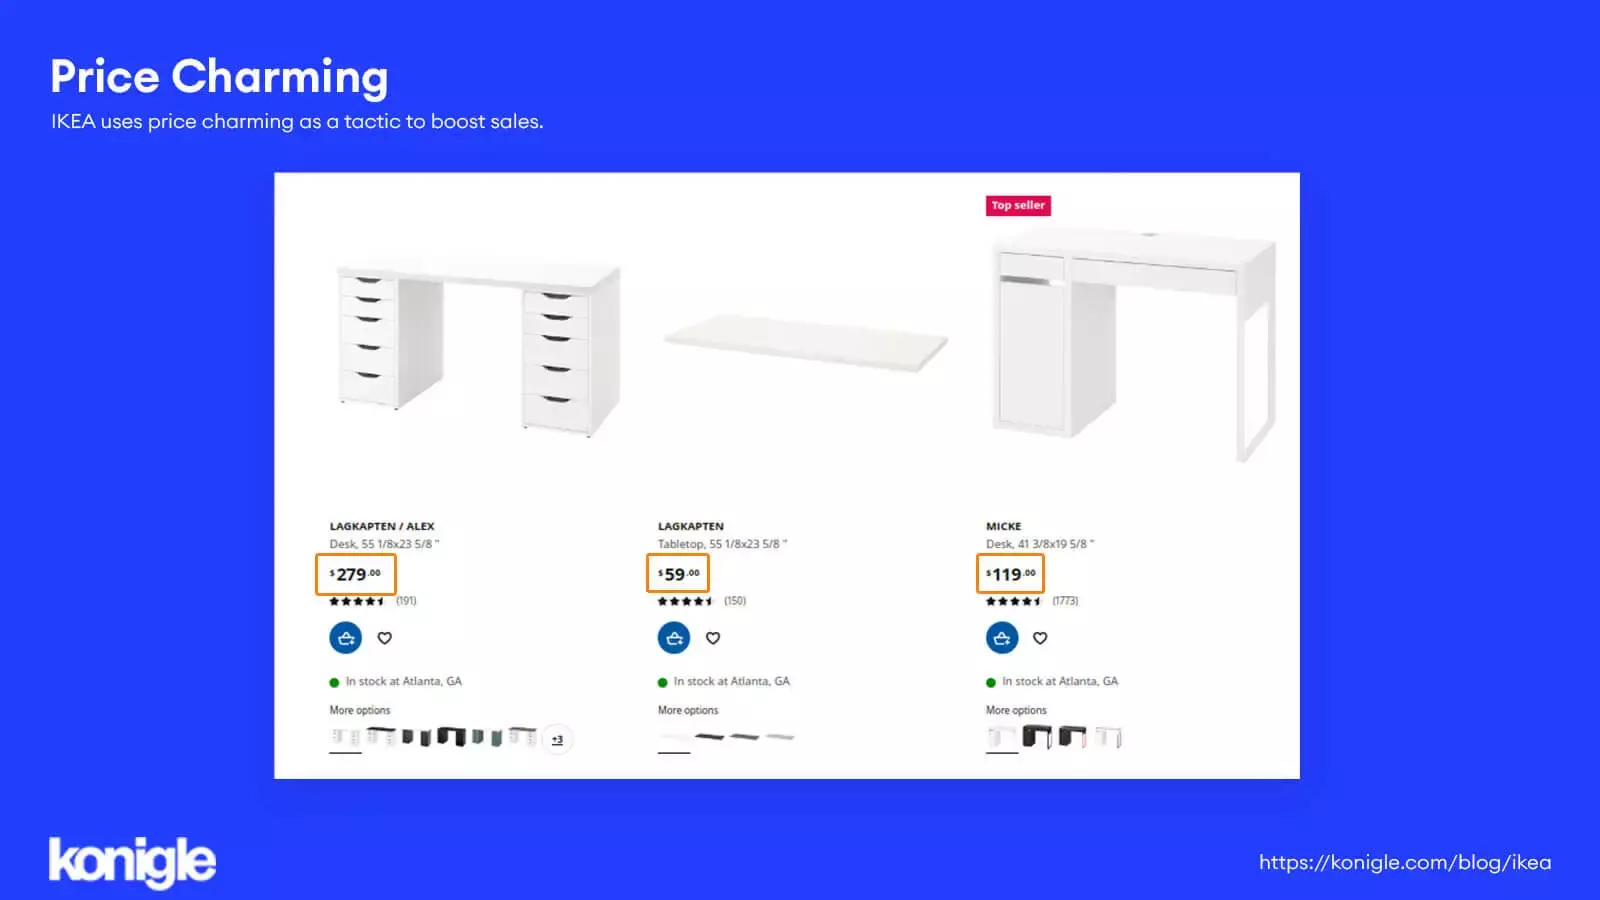 Displaying charm prices that end with .9 for IKEA website visitors.